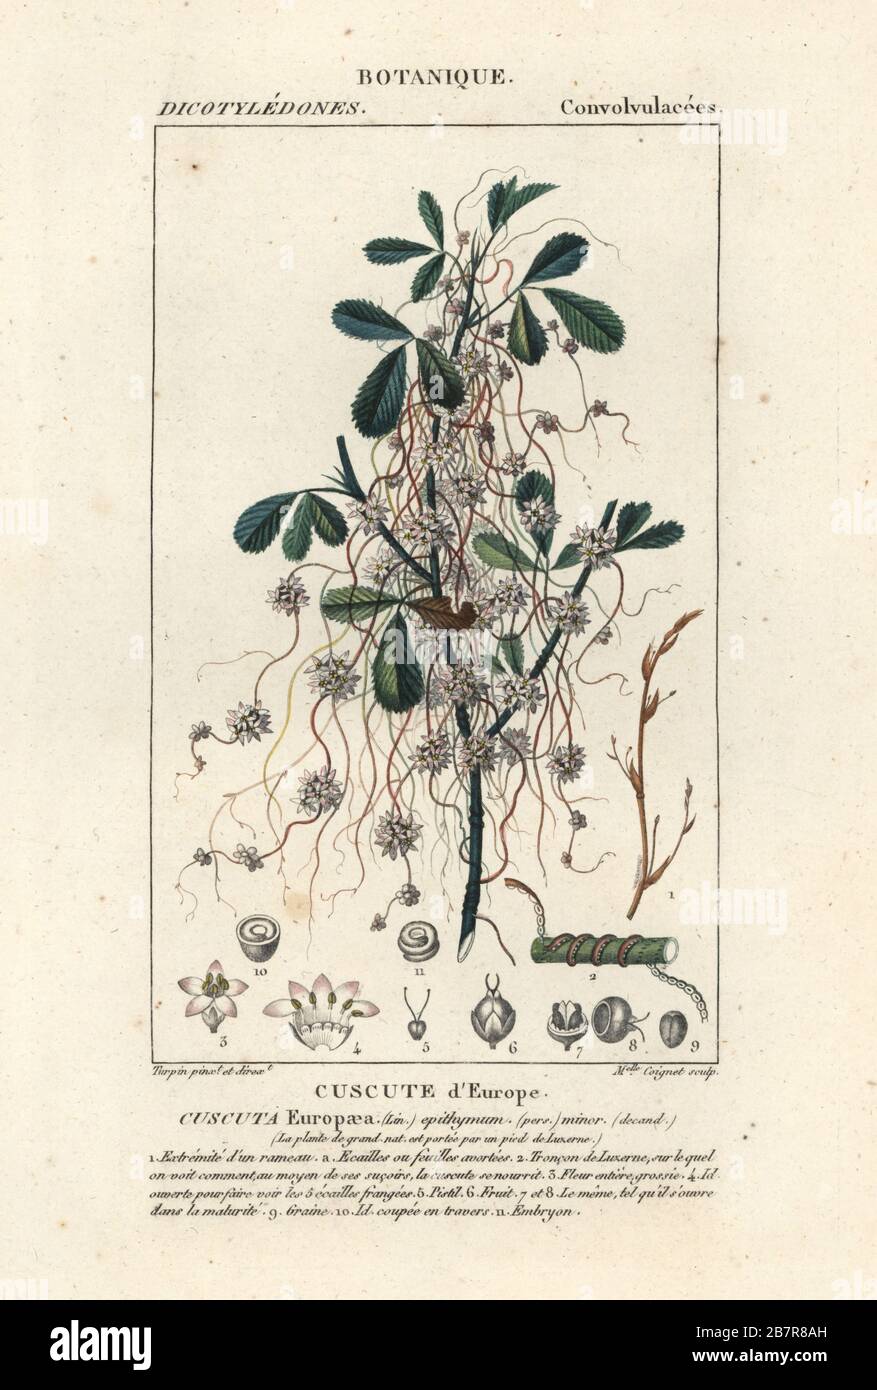 Great dodder or European dodder, Cuscuta europaea, Cuscute d’Europe. Handcoloured copperplate stipple engraving from Antoine Laurent de Jussieu's Dizionario delle Scienze Naturali, Dictionary of Natural Science, Florence, Italy, 1837. Illustration engraved by Mlle. Coignet, drawn and directed by Pierre Jean-Francois Turpin, and published by Batelli e Figli. Turpin (1775-1840) is considered one of the greatest French botanical illustrators of the 19th century. Stock Photo